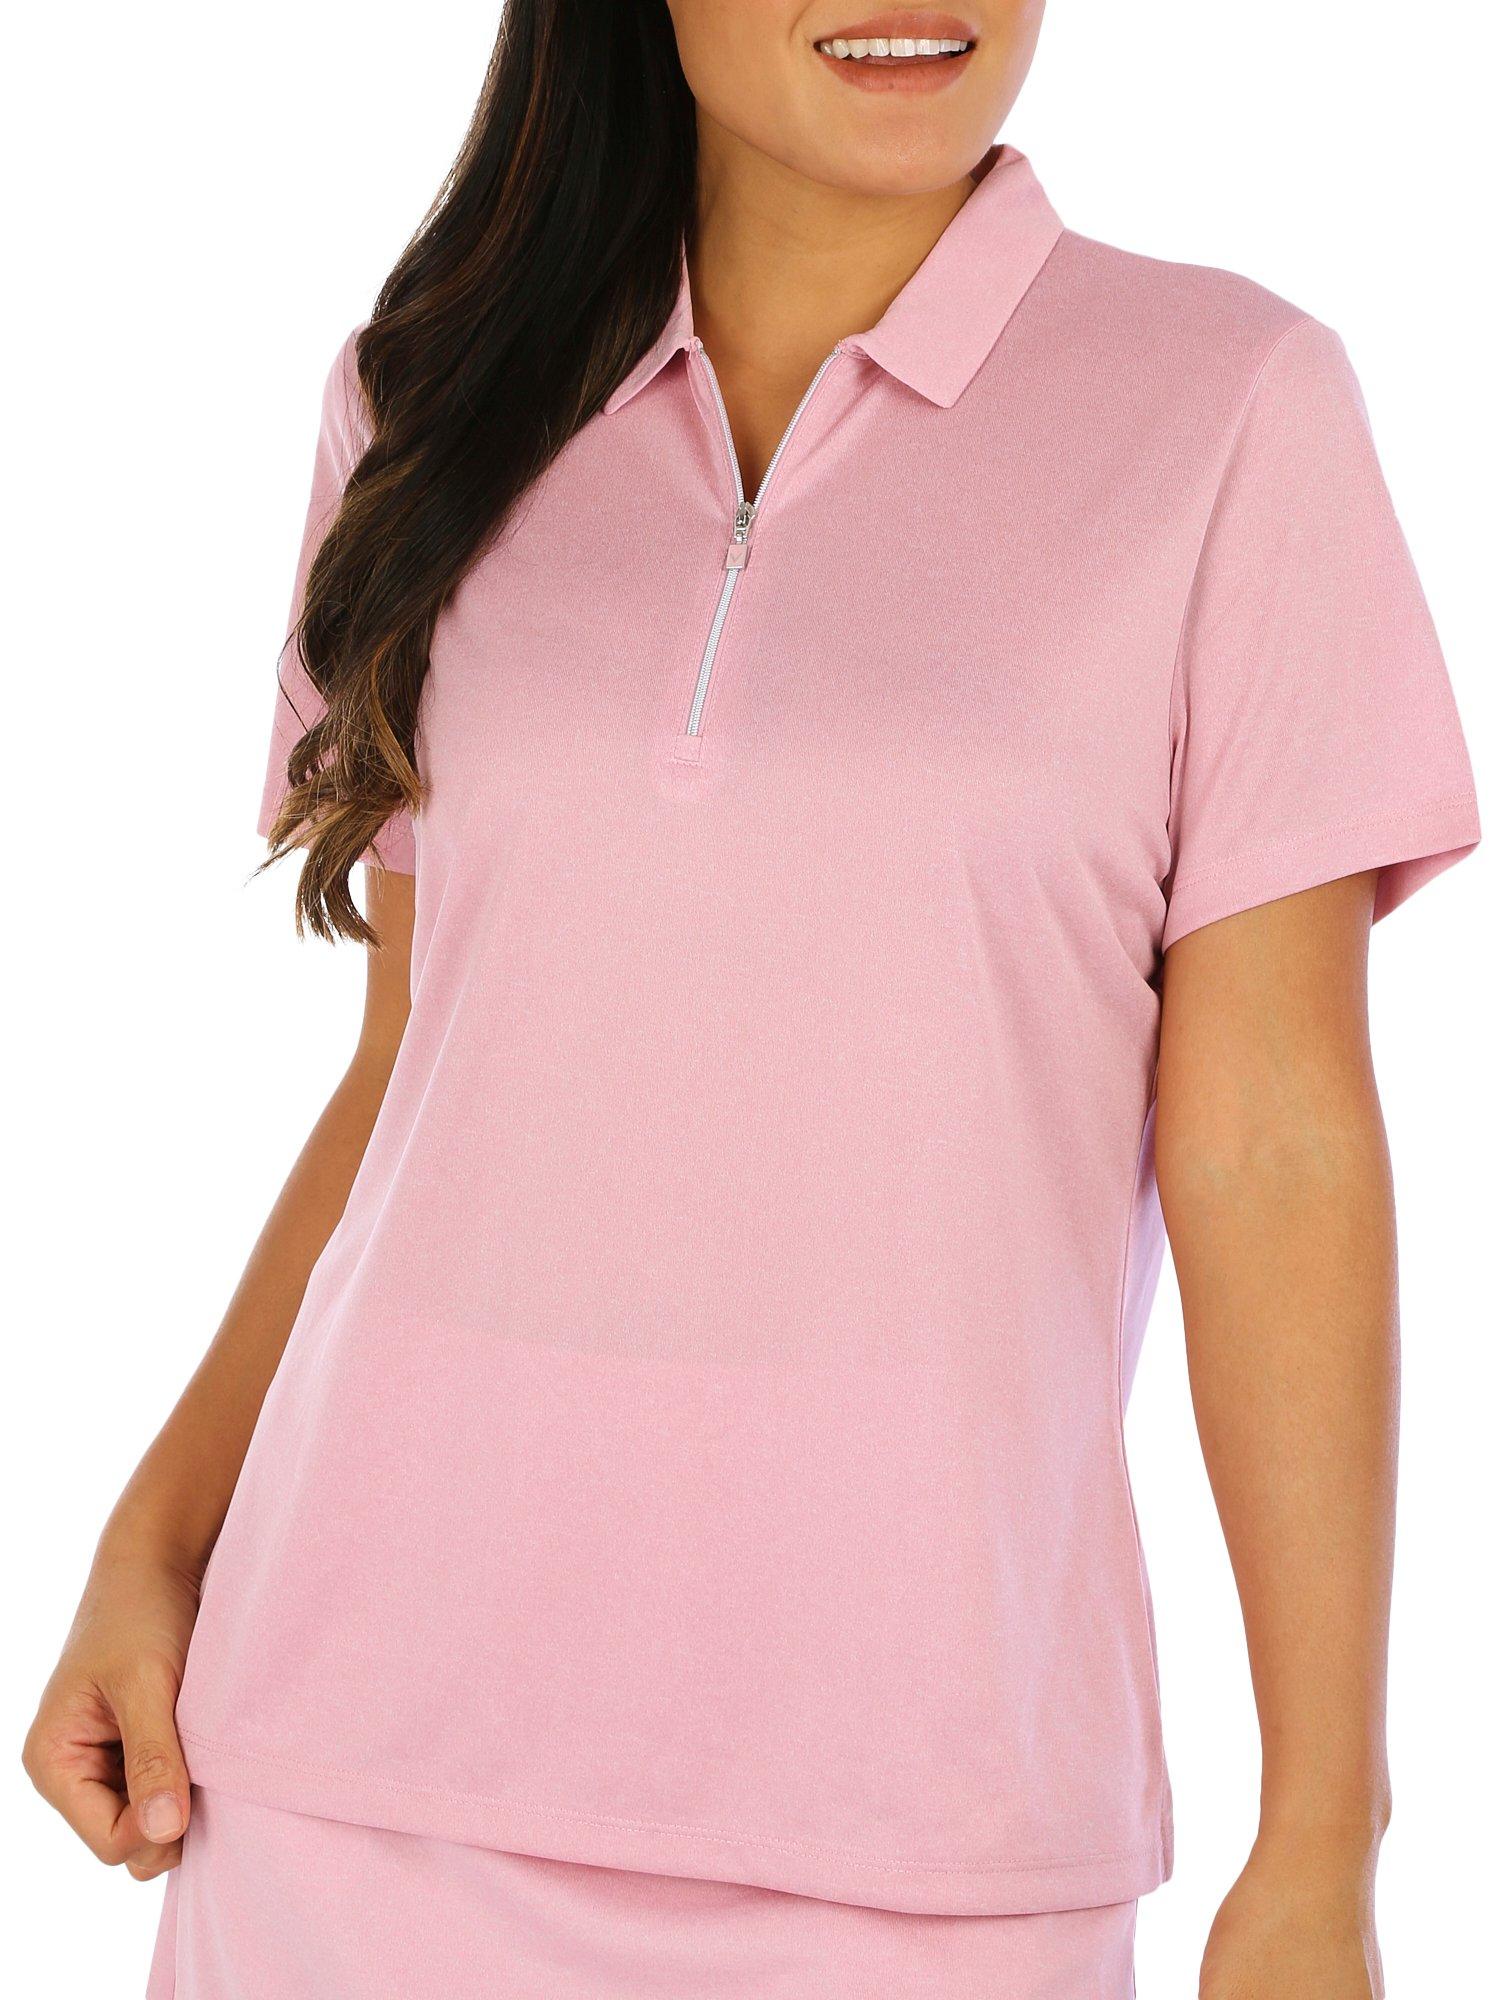 Womens Solid 1/4 Zip Heather Short Sleeve Polo